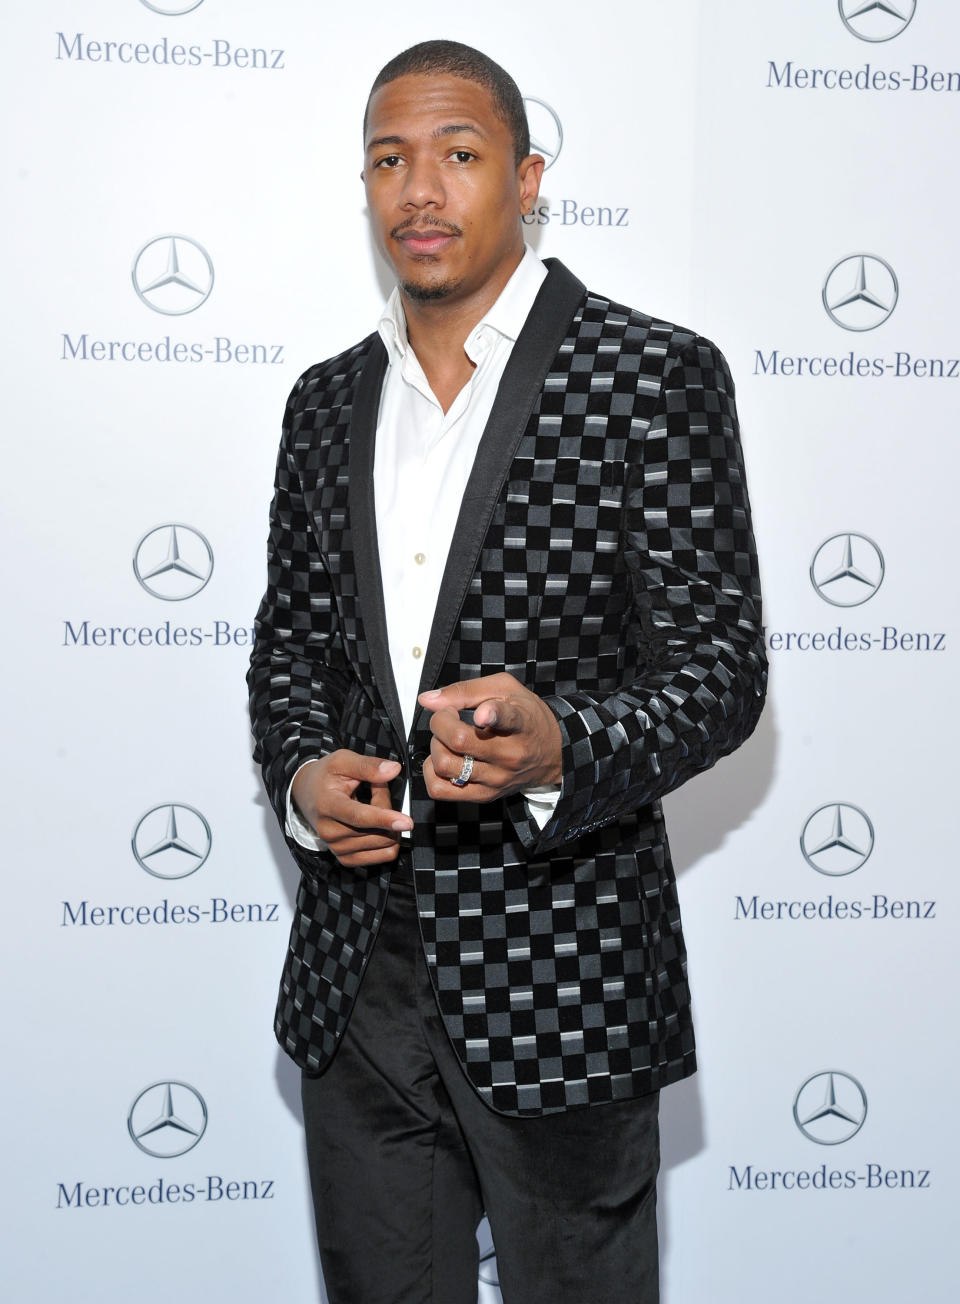 The Gala Opening Of The New Mercedes-Benz Manhattan